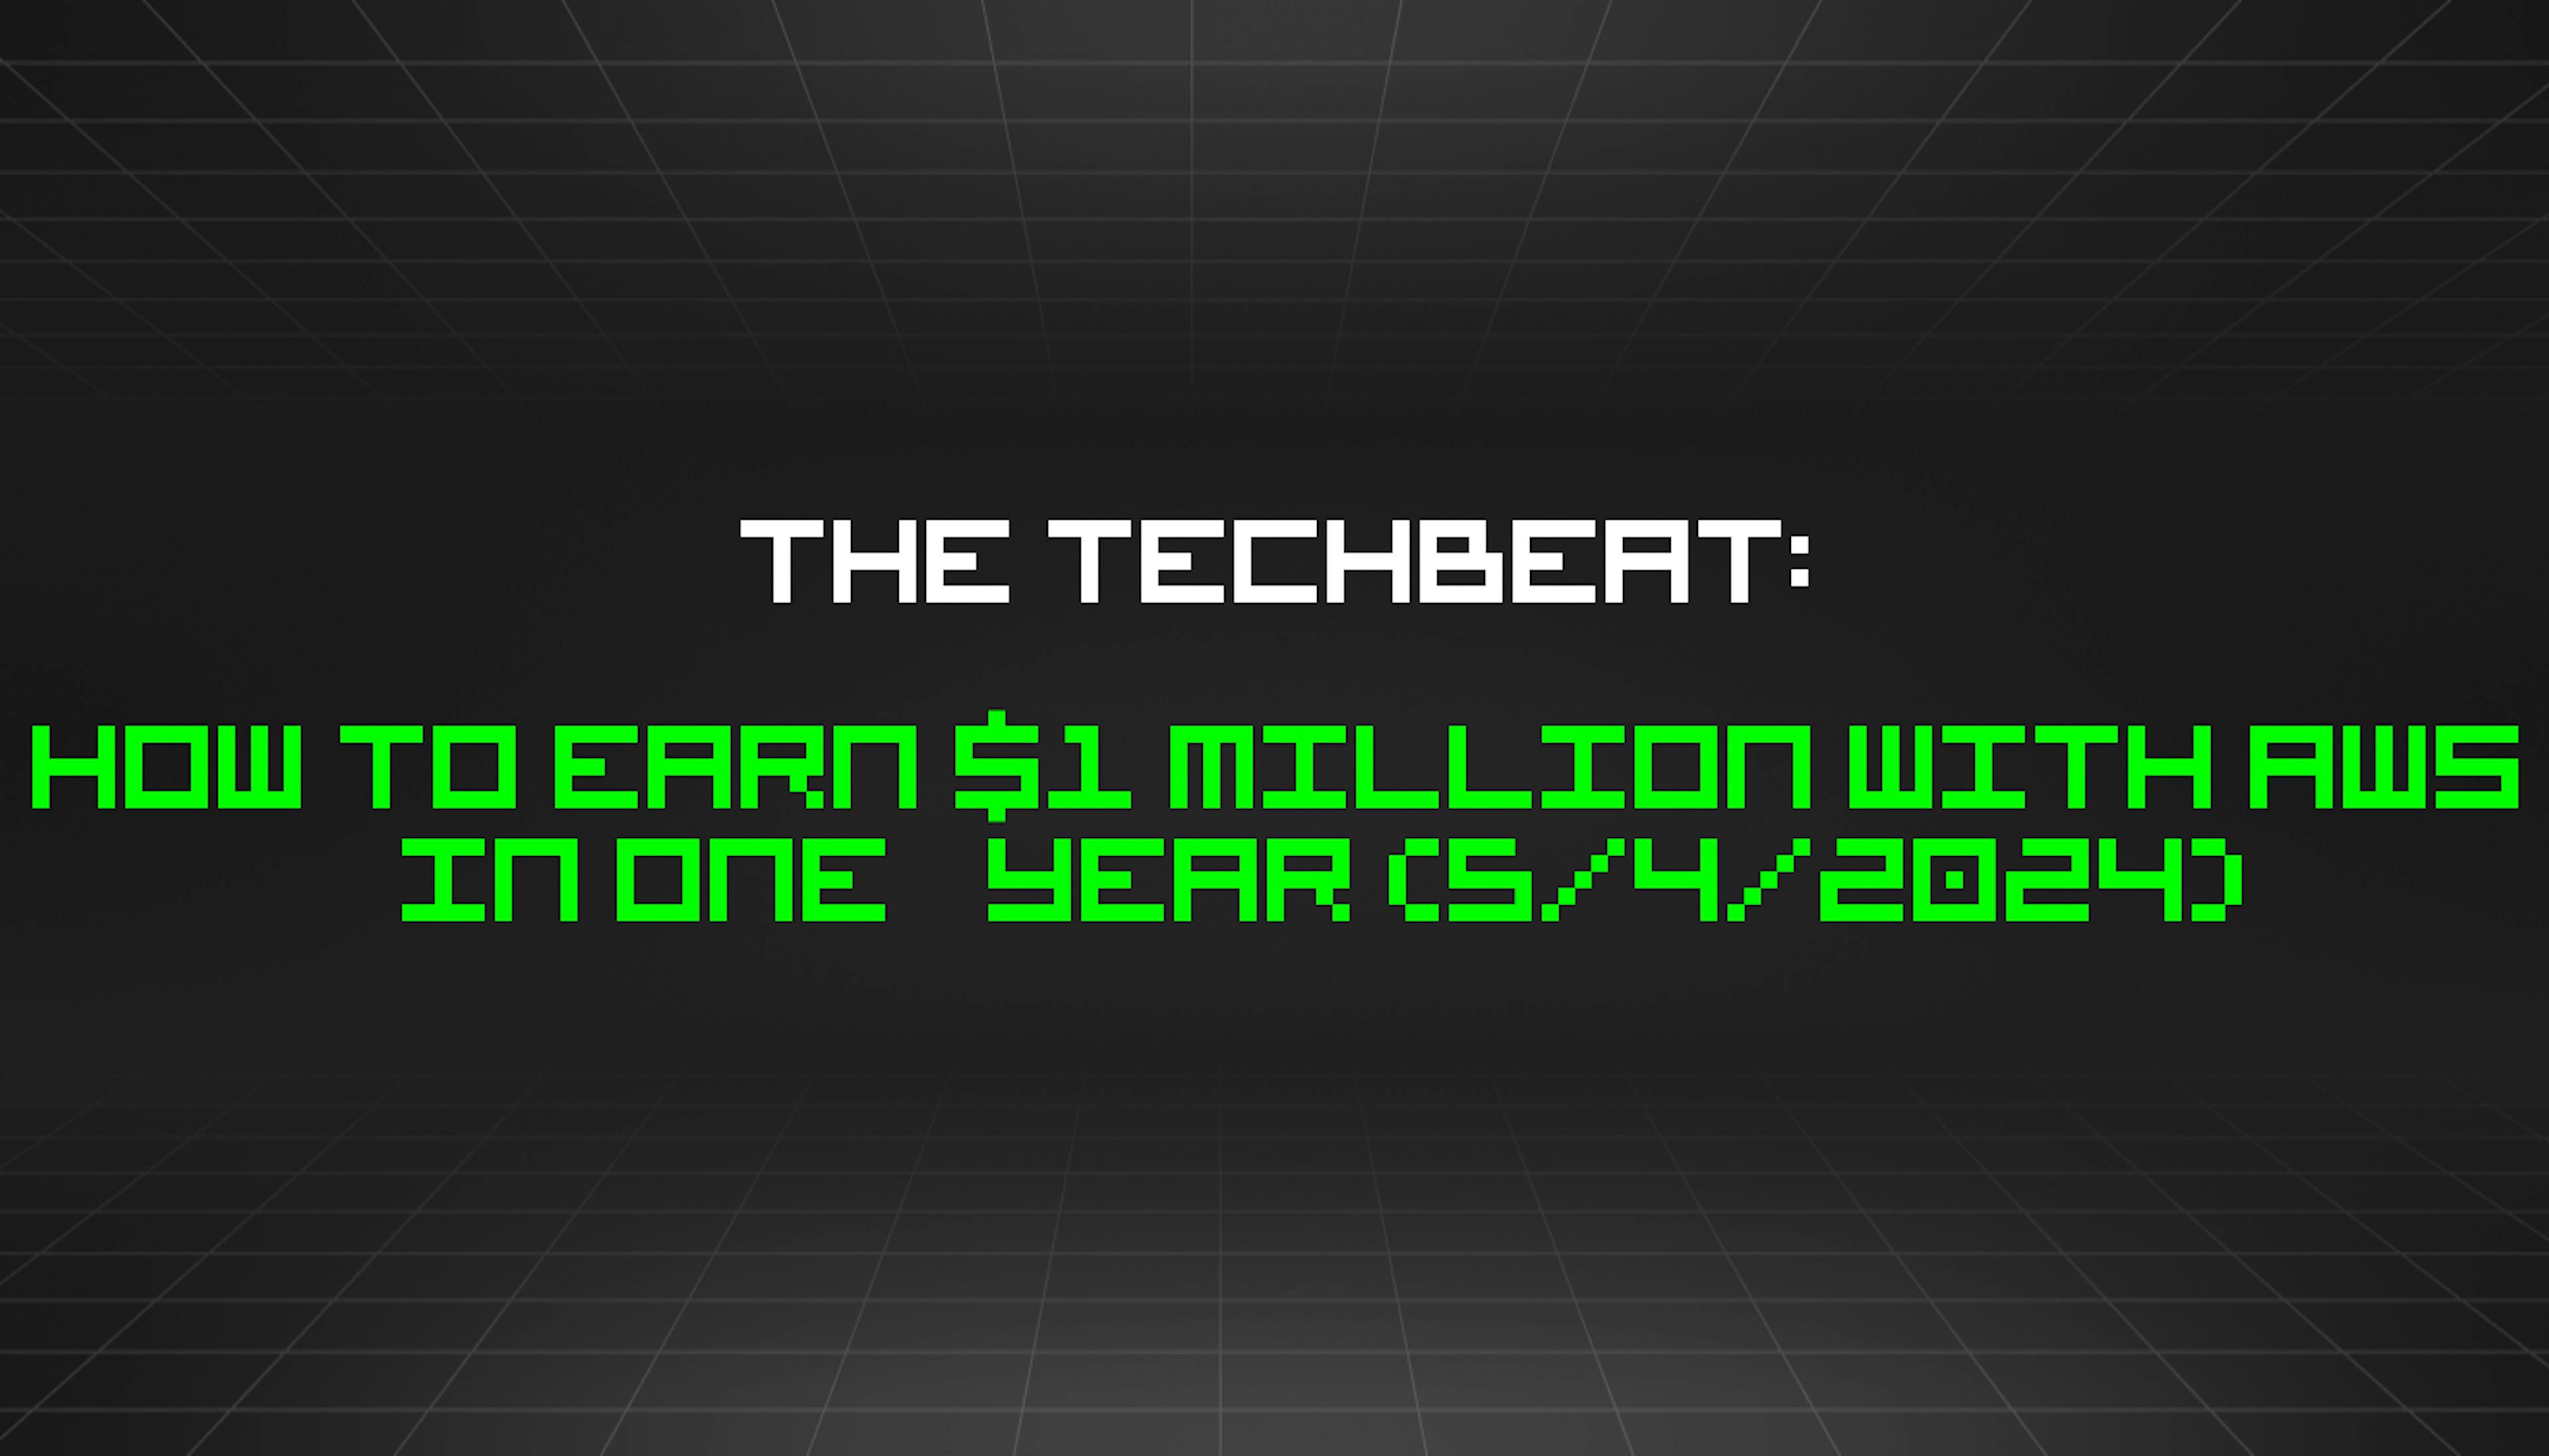 featured image - The TechBeat: How to Earn $1 Million With AWS in One Year (5/4/2024)